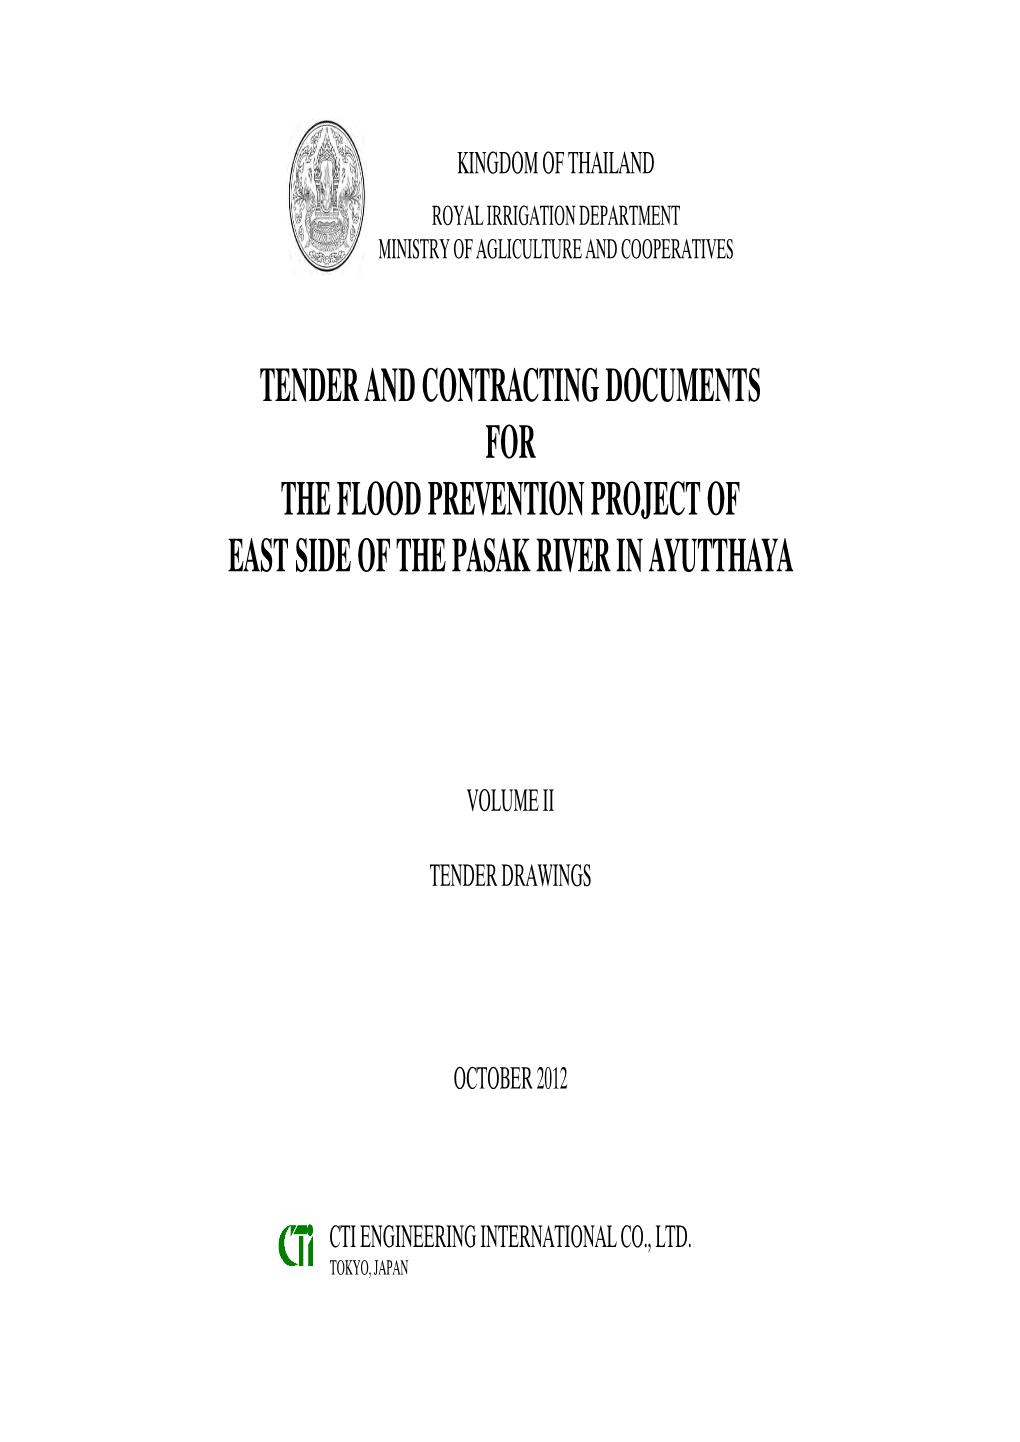 Tender and Contracting Documents for the Flood Prevention Project of East Side of the Pasak River in Ayutthaya